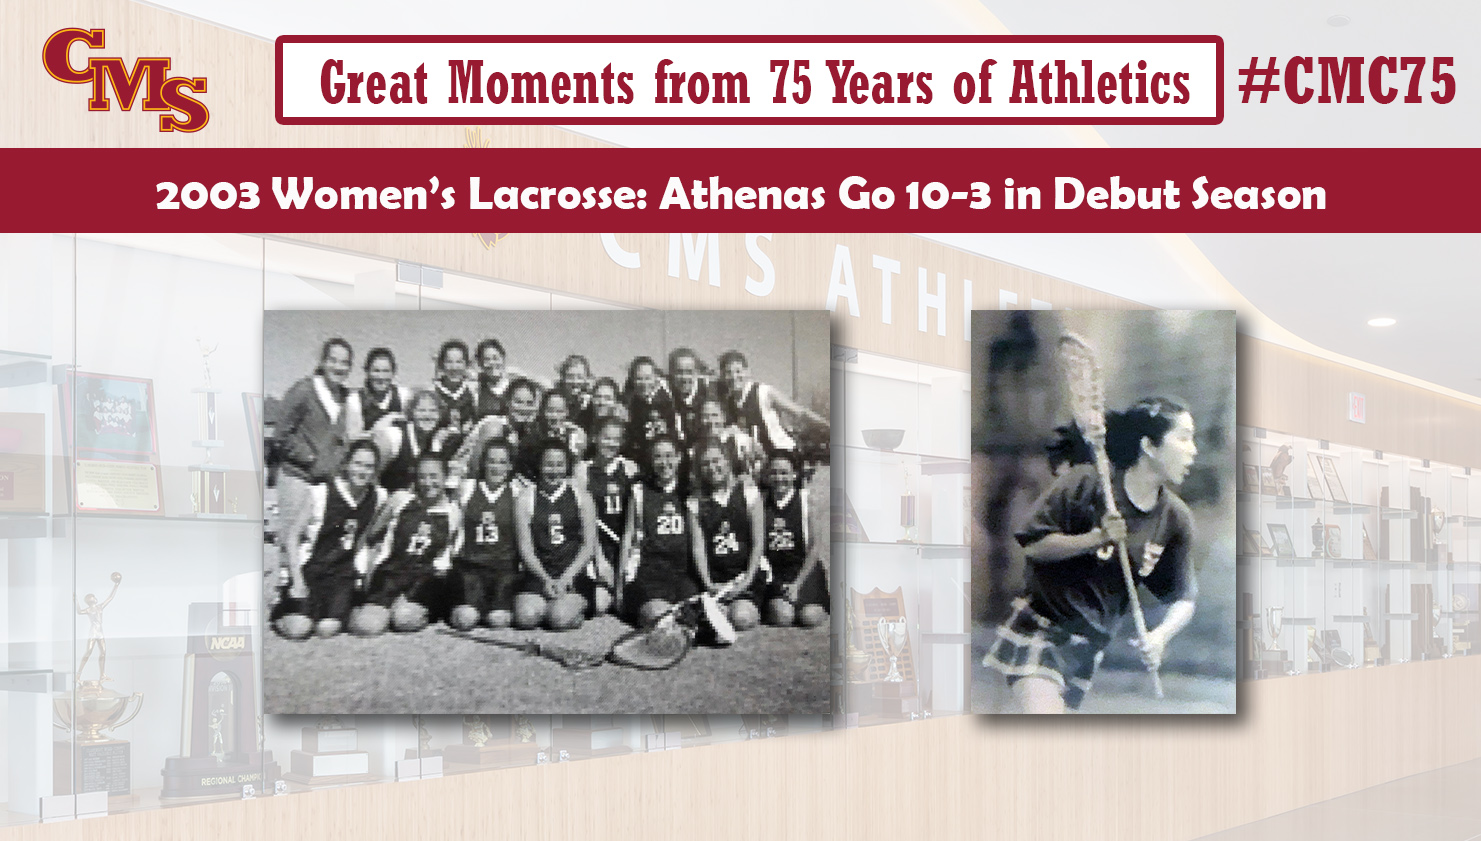 Team photo and an action shot of Lea Crusey. Words over the photo read: Great Moments from 75 Years of Athletics, 2003 Women's Lacrosse: Athenas Go 10-3 in Debut Season